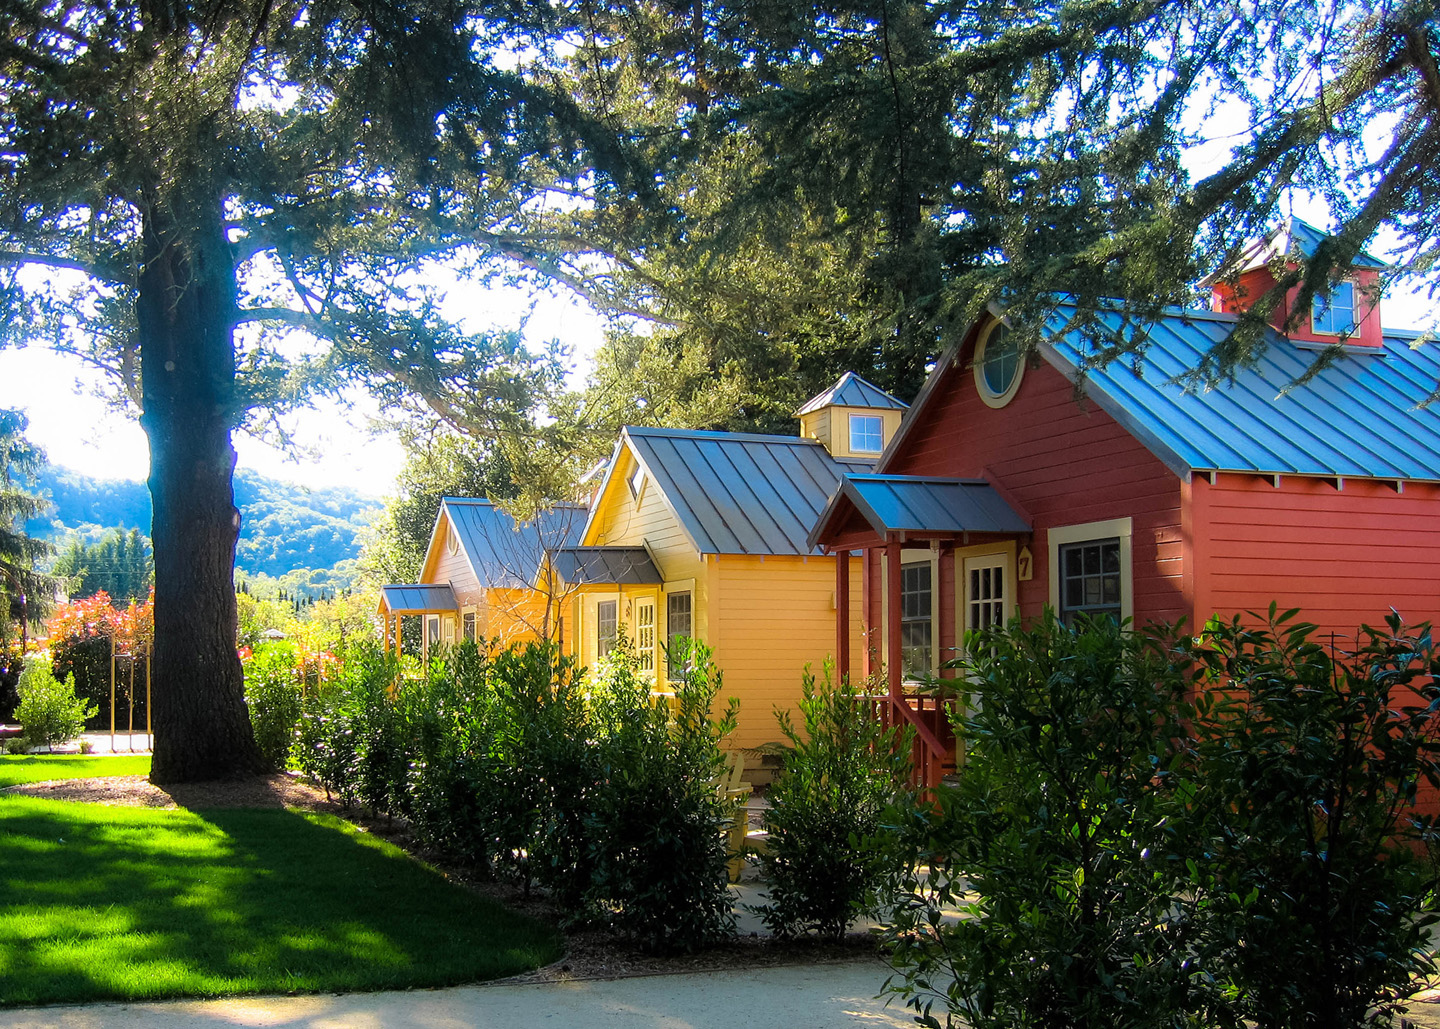 The Cottages of Napa Valley